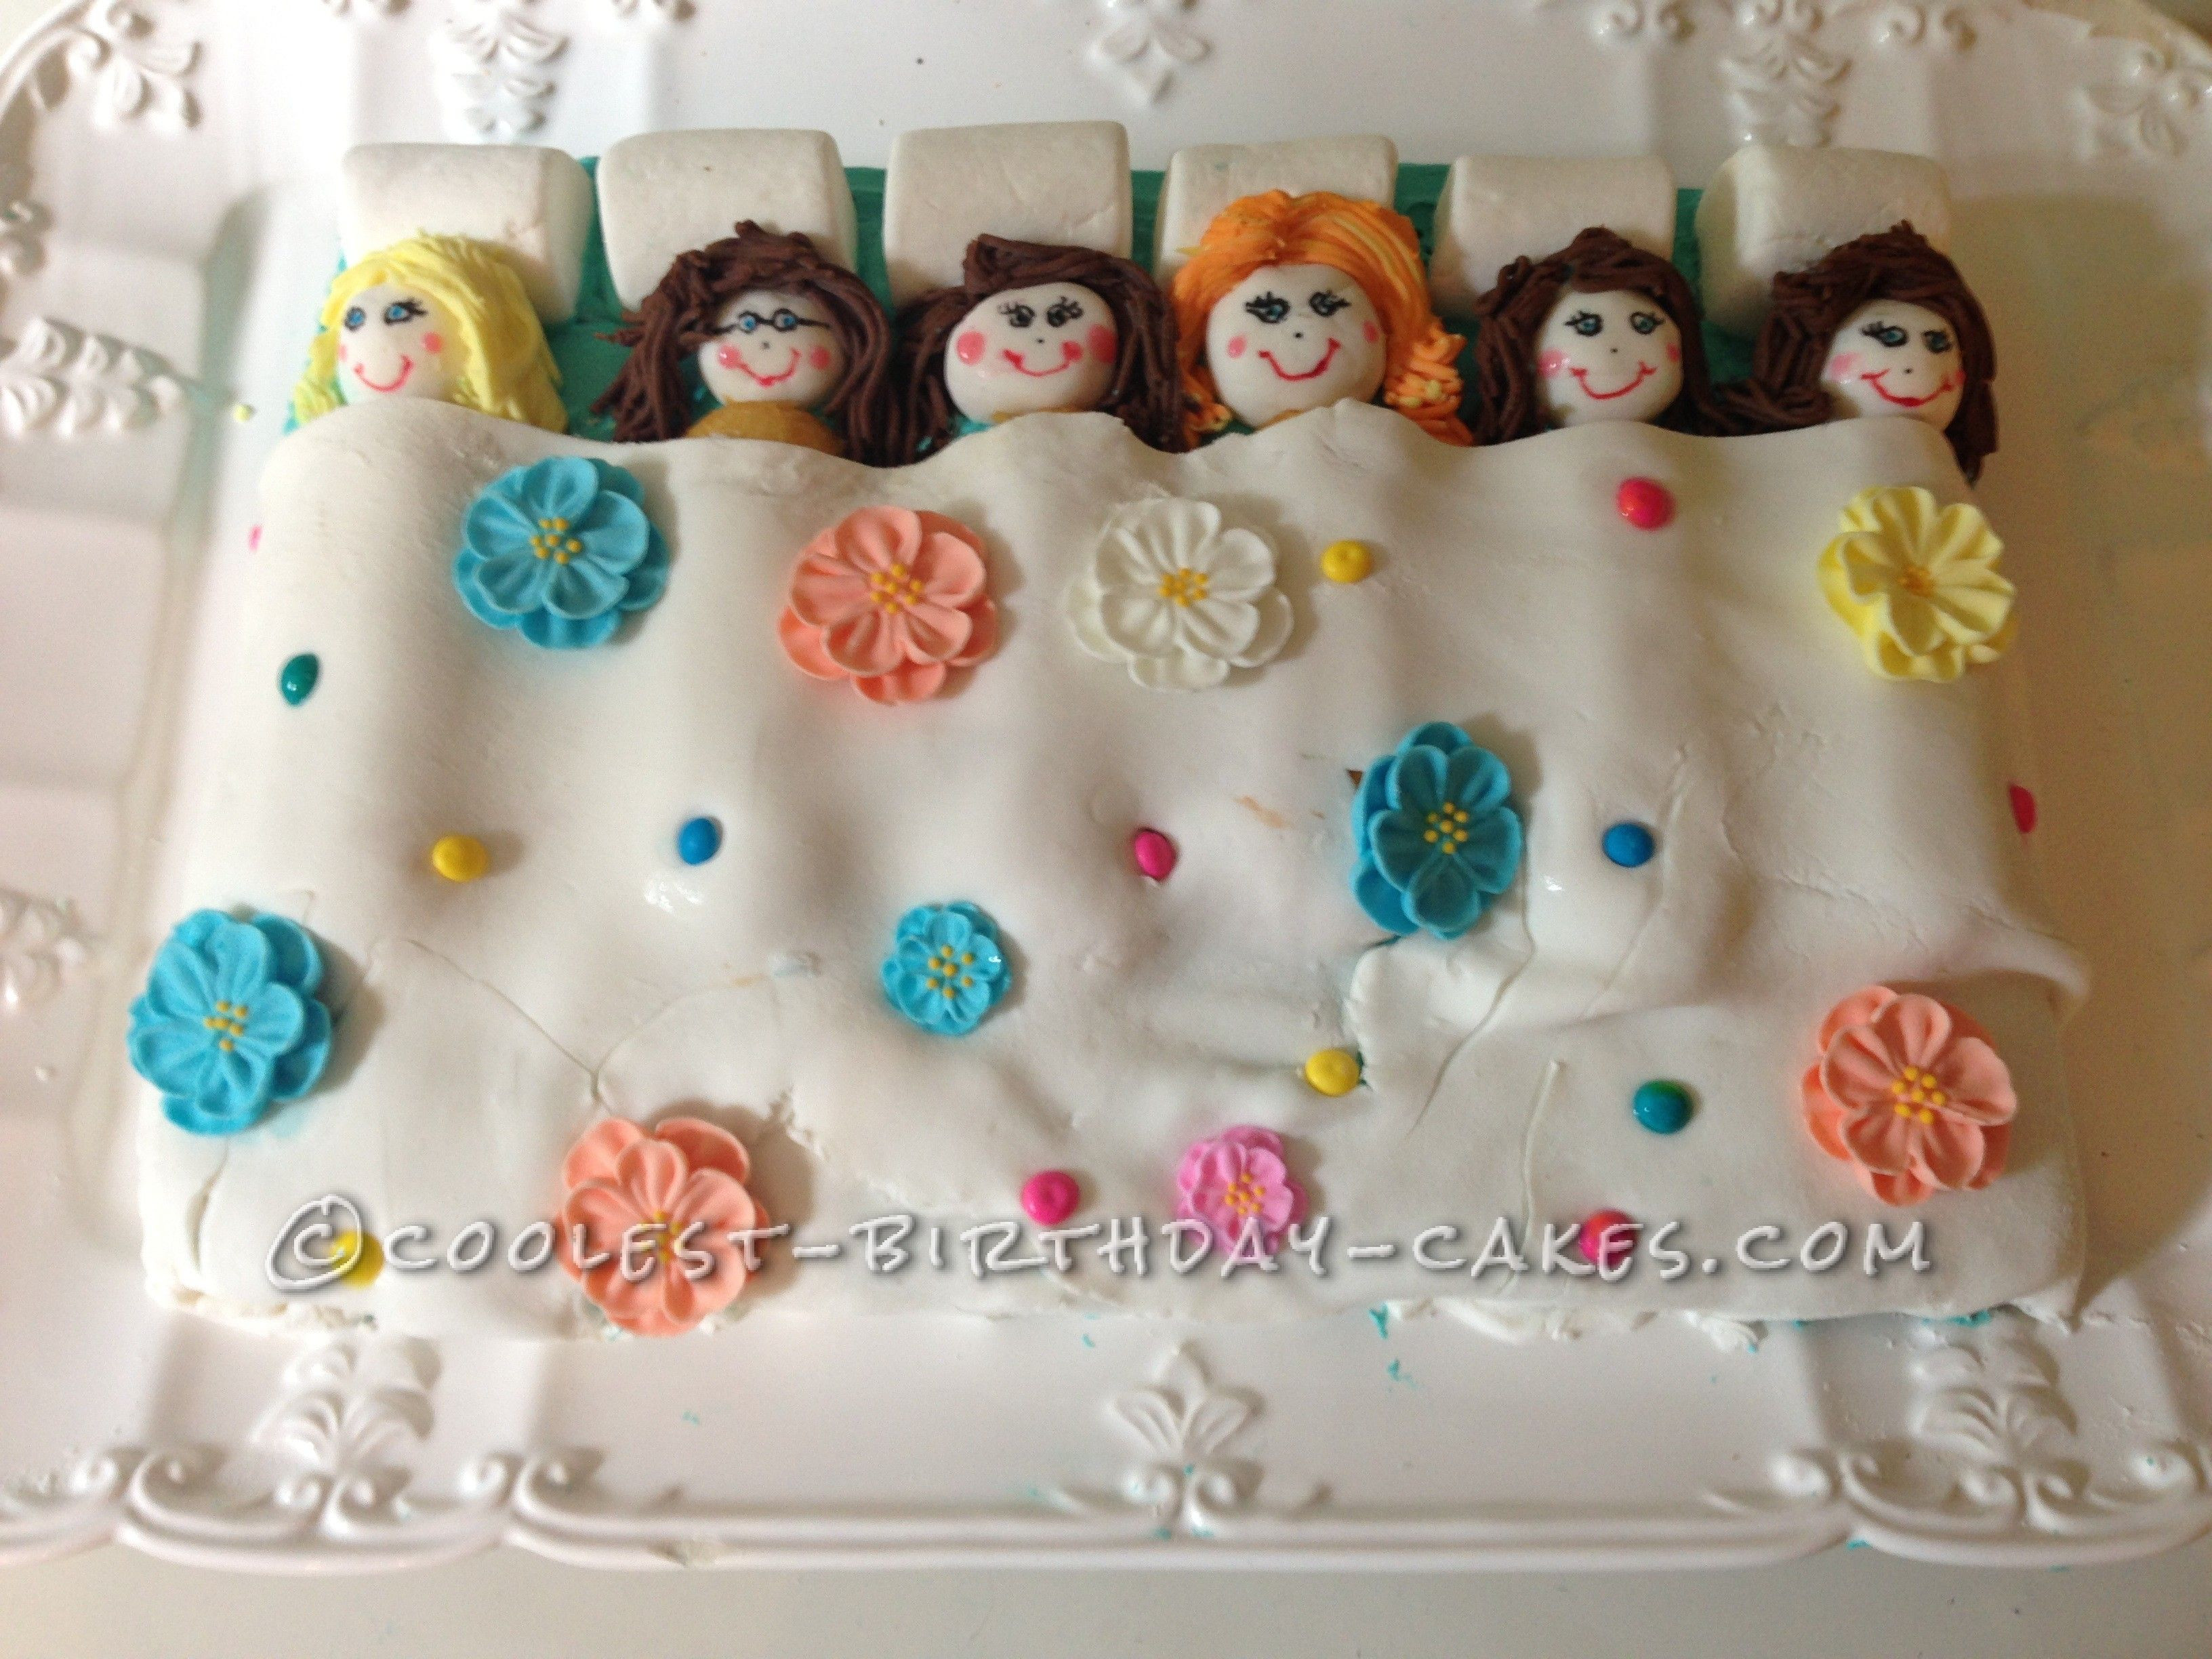 7 Year Old Birthday Party Ideas
 Slumber Party Cake for my 7 Year Old